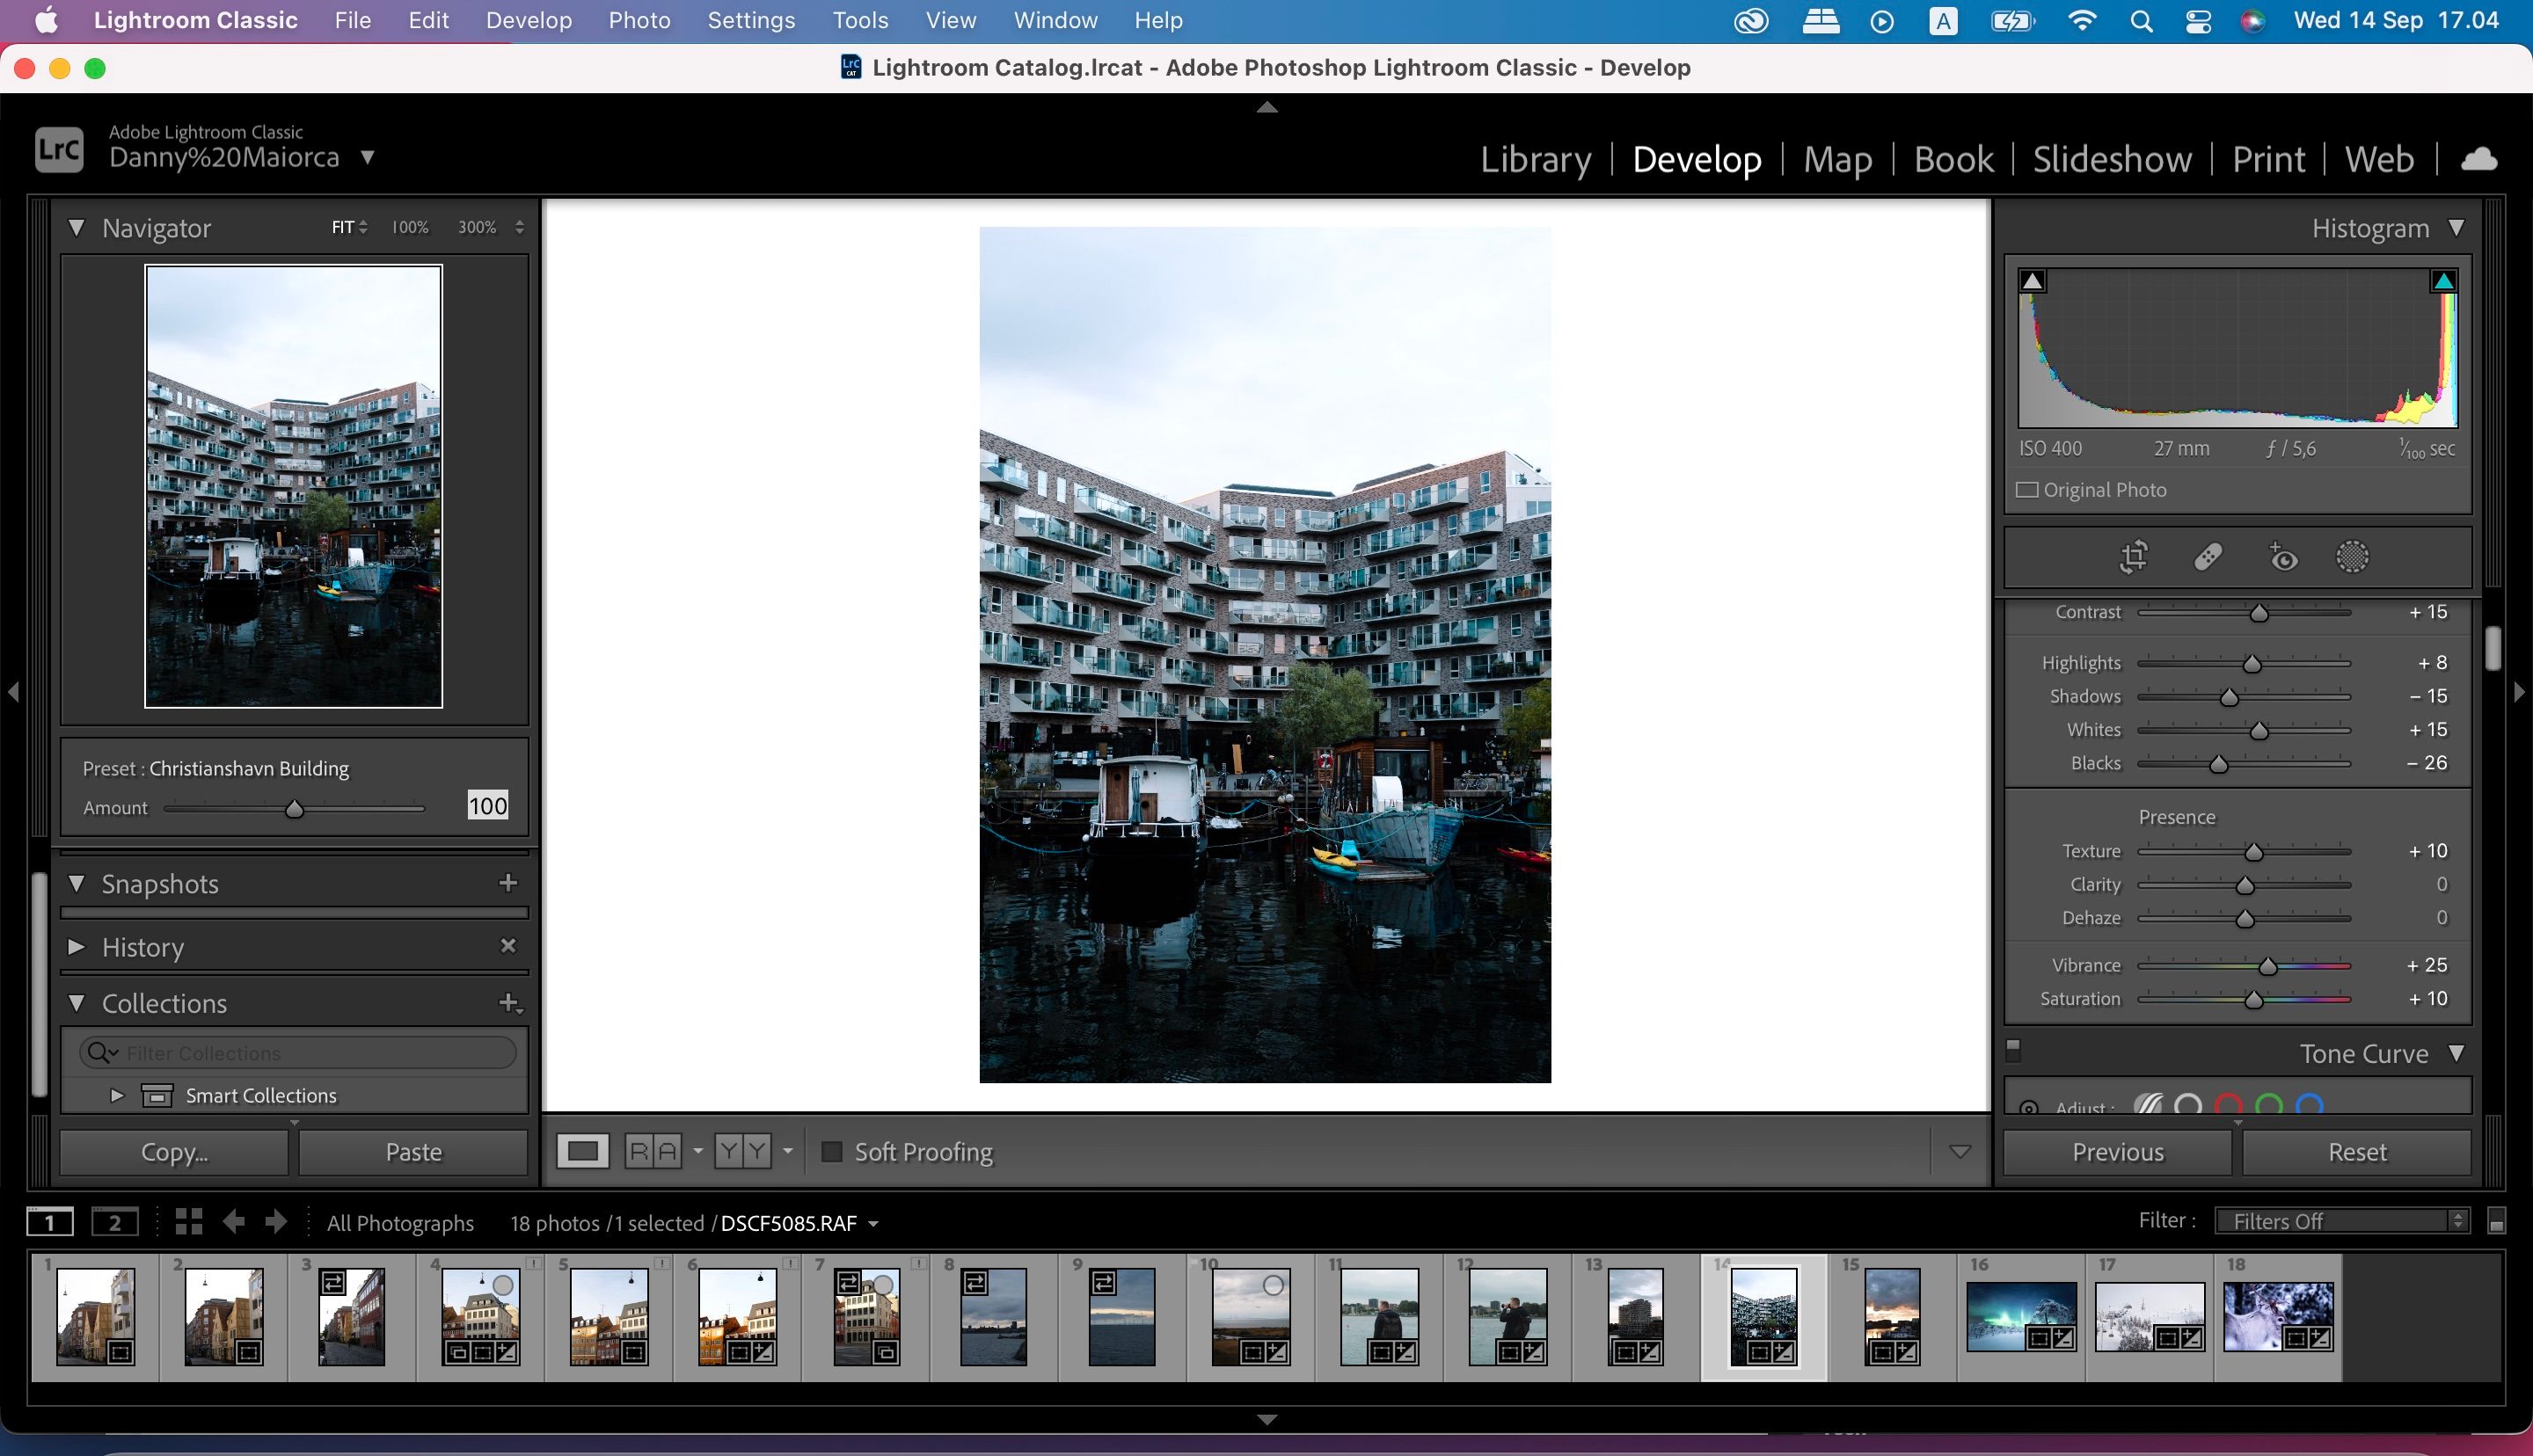 Screenshot showing the main photo editing tools in Lightroom